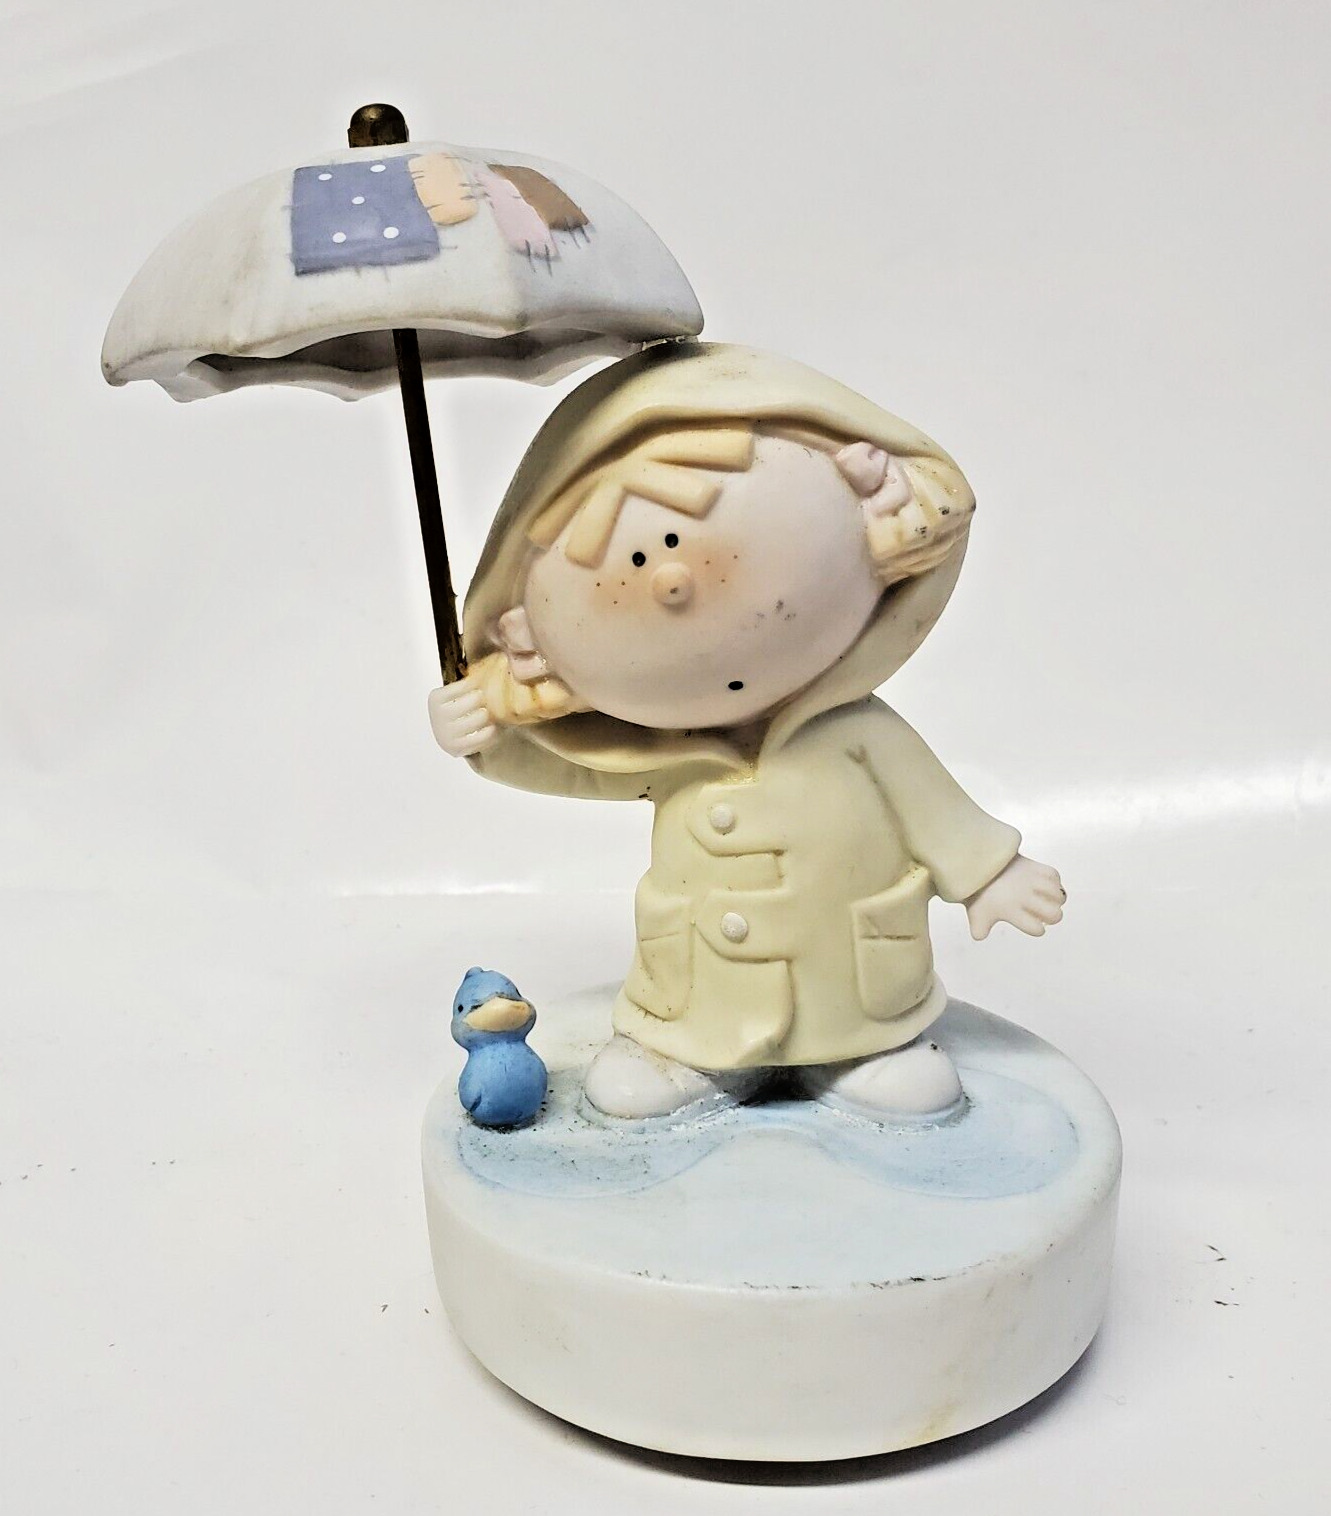 VINTAGE UMBRELLA GIRL With Bluebird MUSIC BOX Works Great (WITH VIDEO)